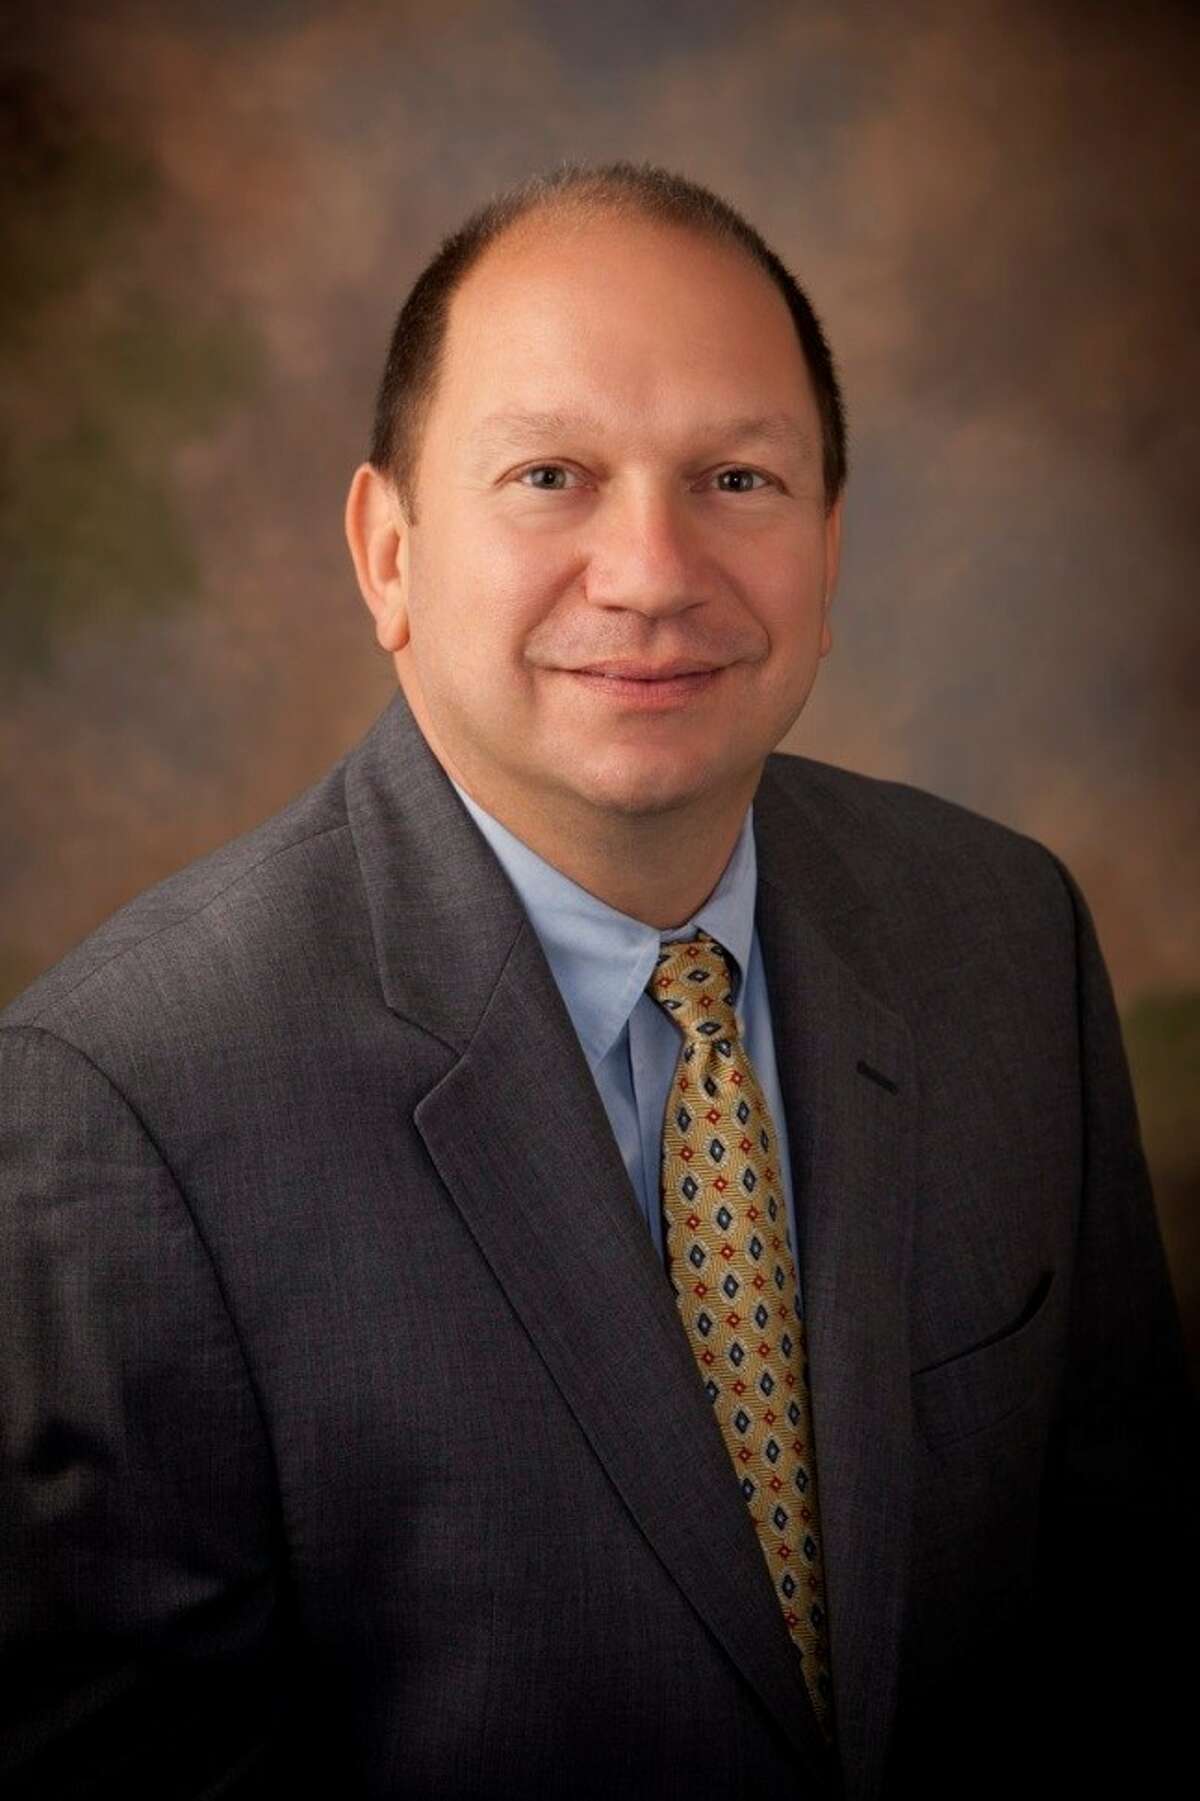 Edward “Ed” Banos has been named University Health System's new chief operating officer and executive vice president.